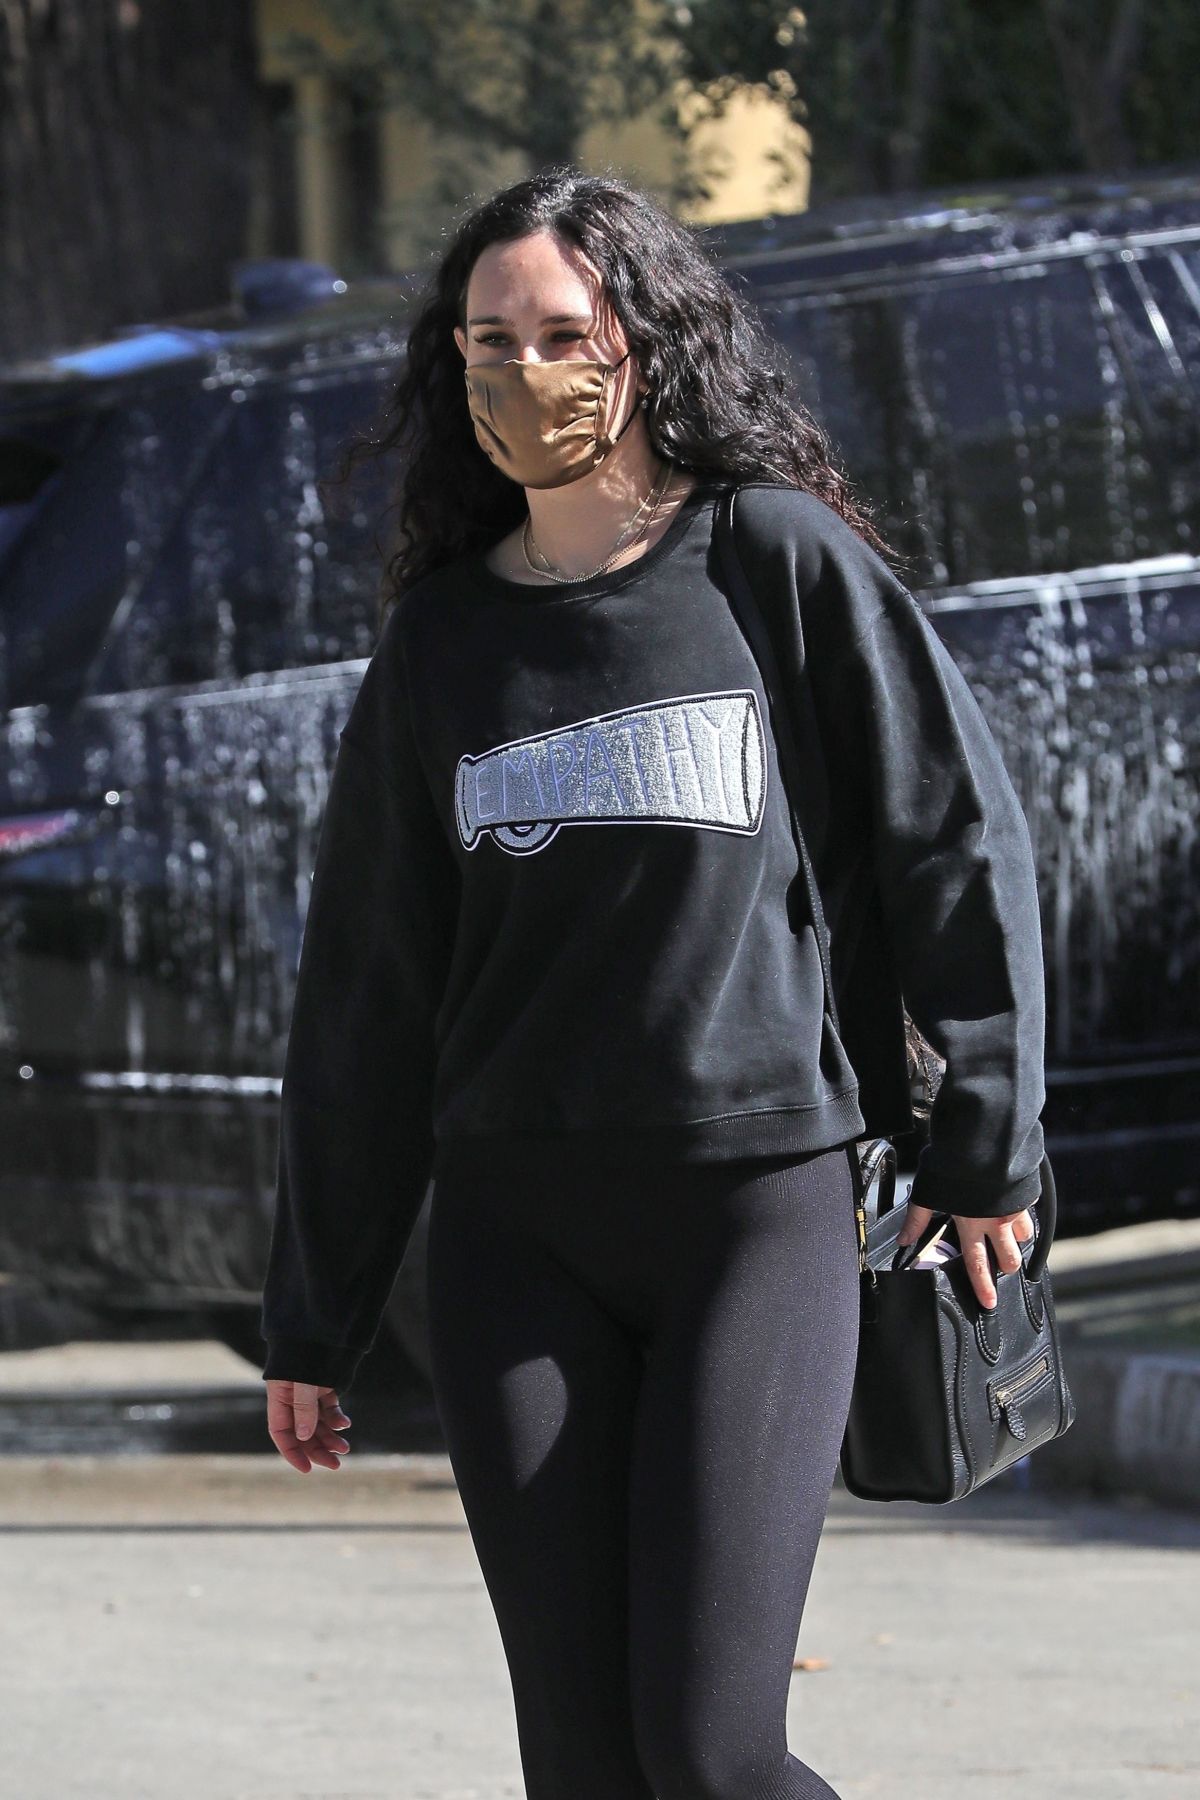 RUMER WILLIS Leaves a Private Gym in Los Angeles 03/29/2021 – HawtCelebs